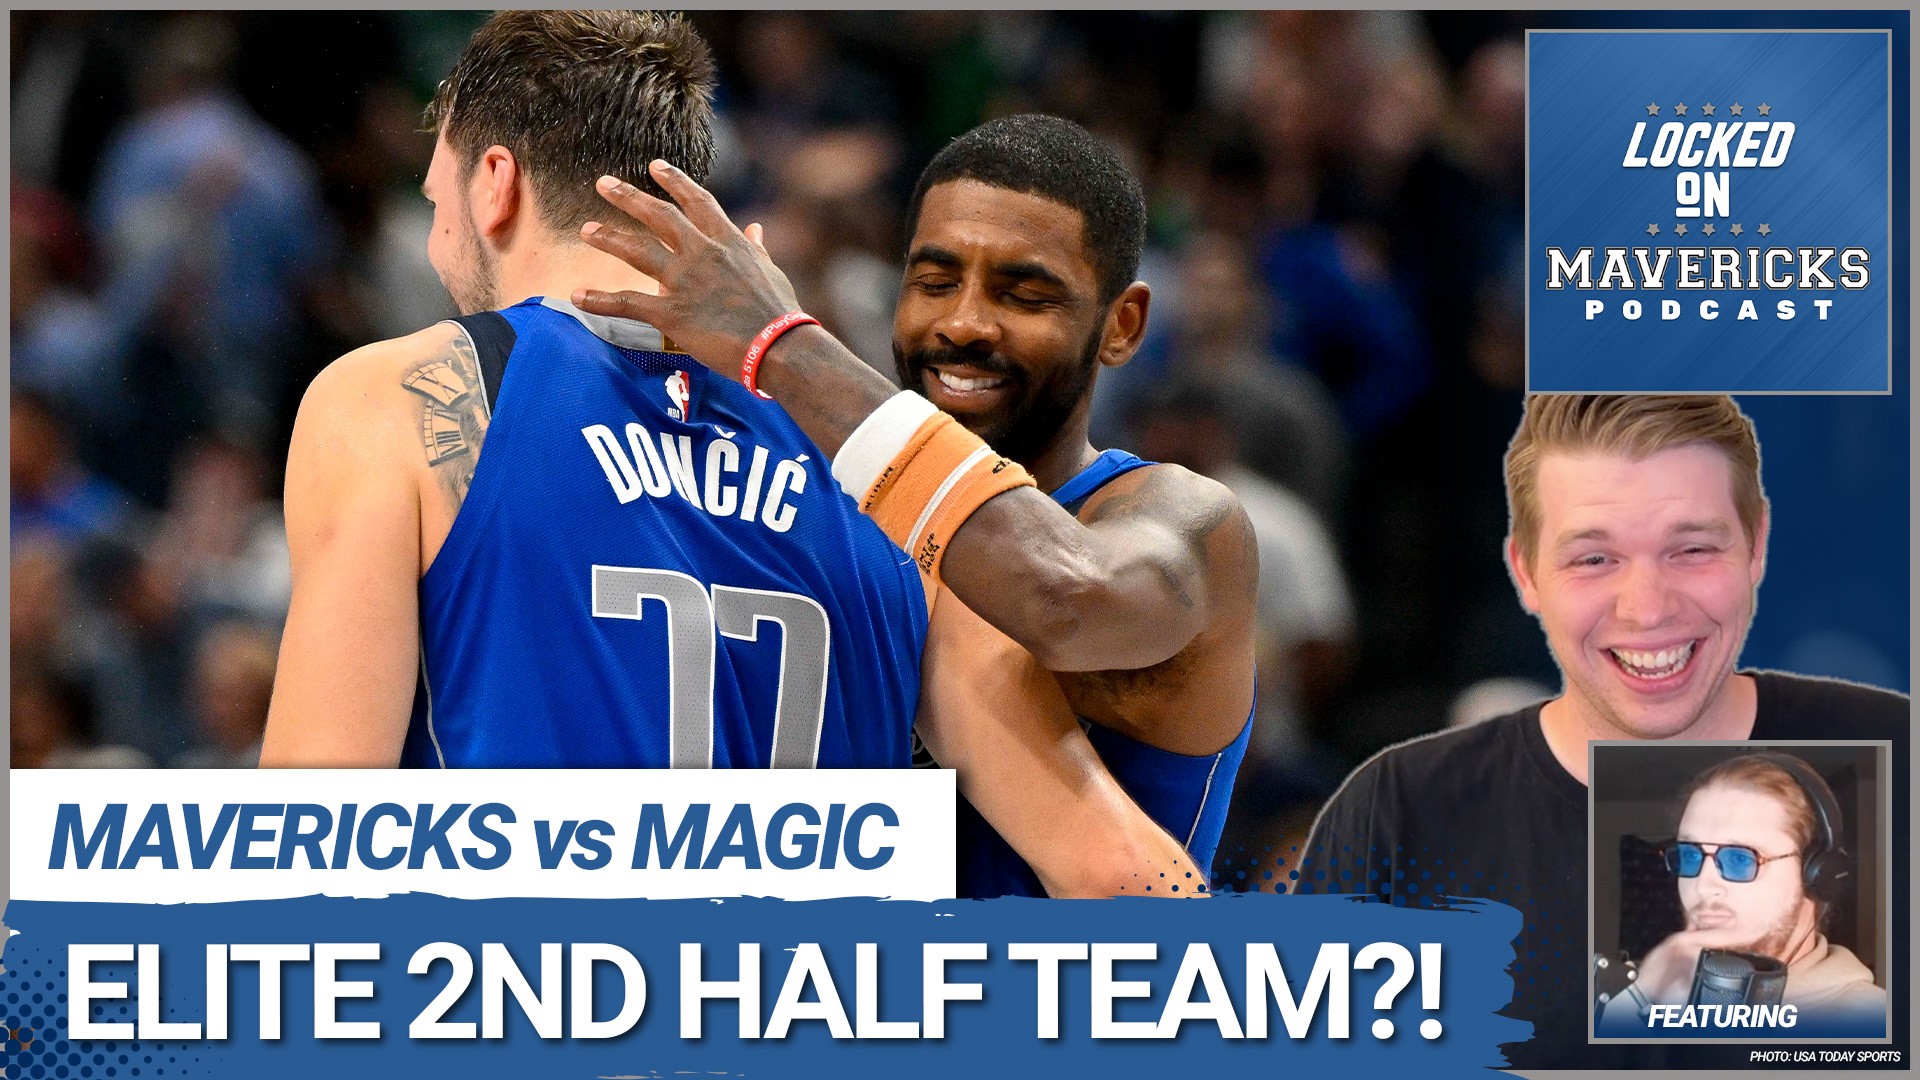 Nick Angstadt & Slightly Biased breakdown the Dallas Mavericks vs Orlando Magic game and how Kyrie Irving's two halves tell the story for the Mavs.